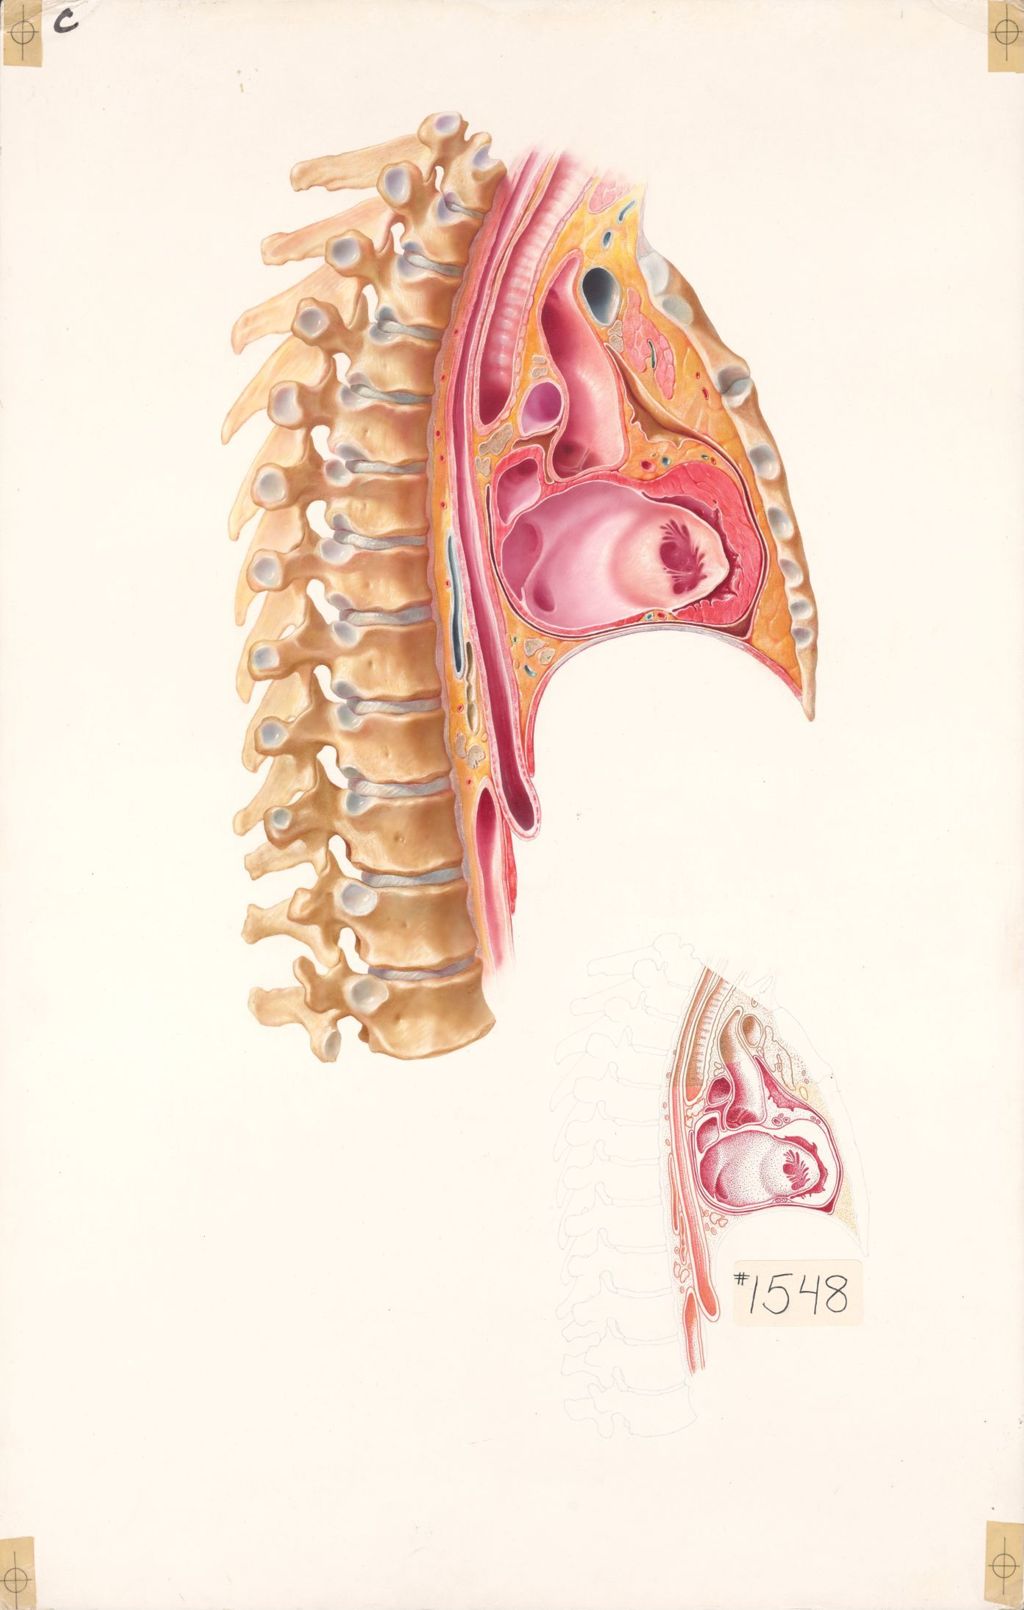 The Anatomical Disposition of the Thorax, The Mediastinum, Plate I, Sagittal Section through the Mediastinum